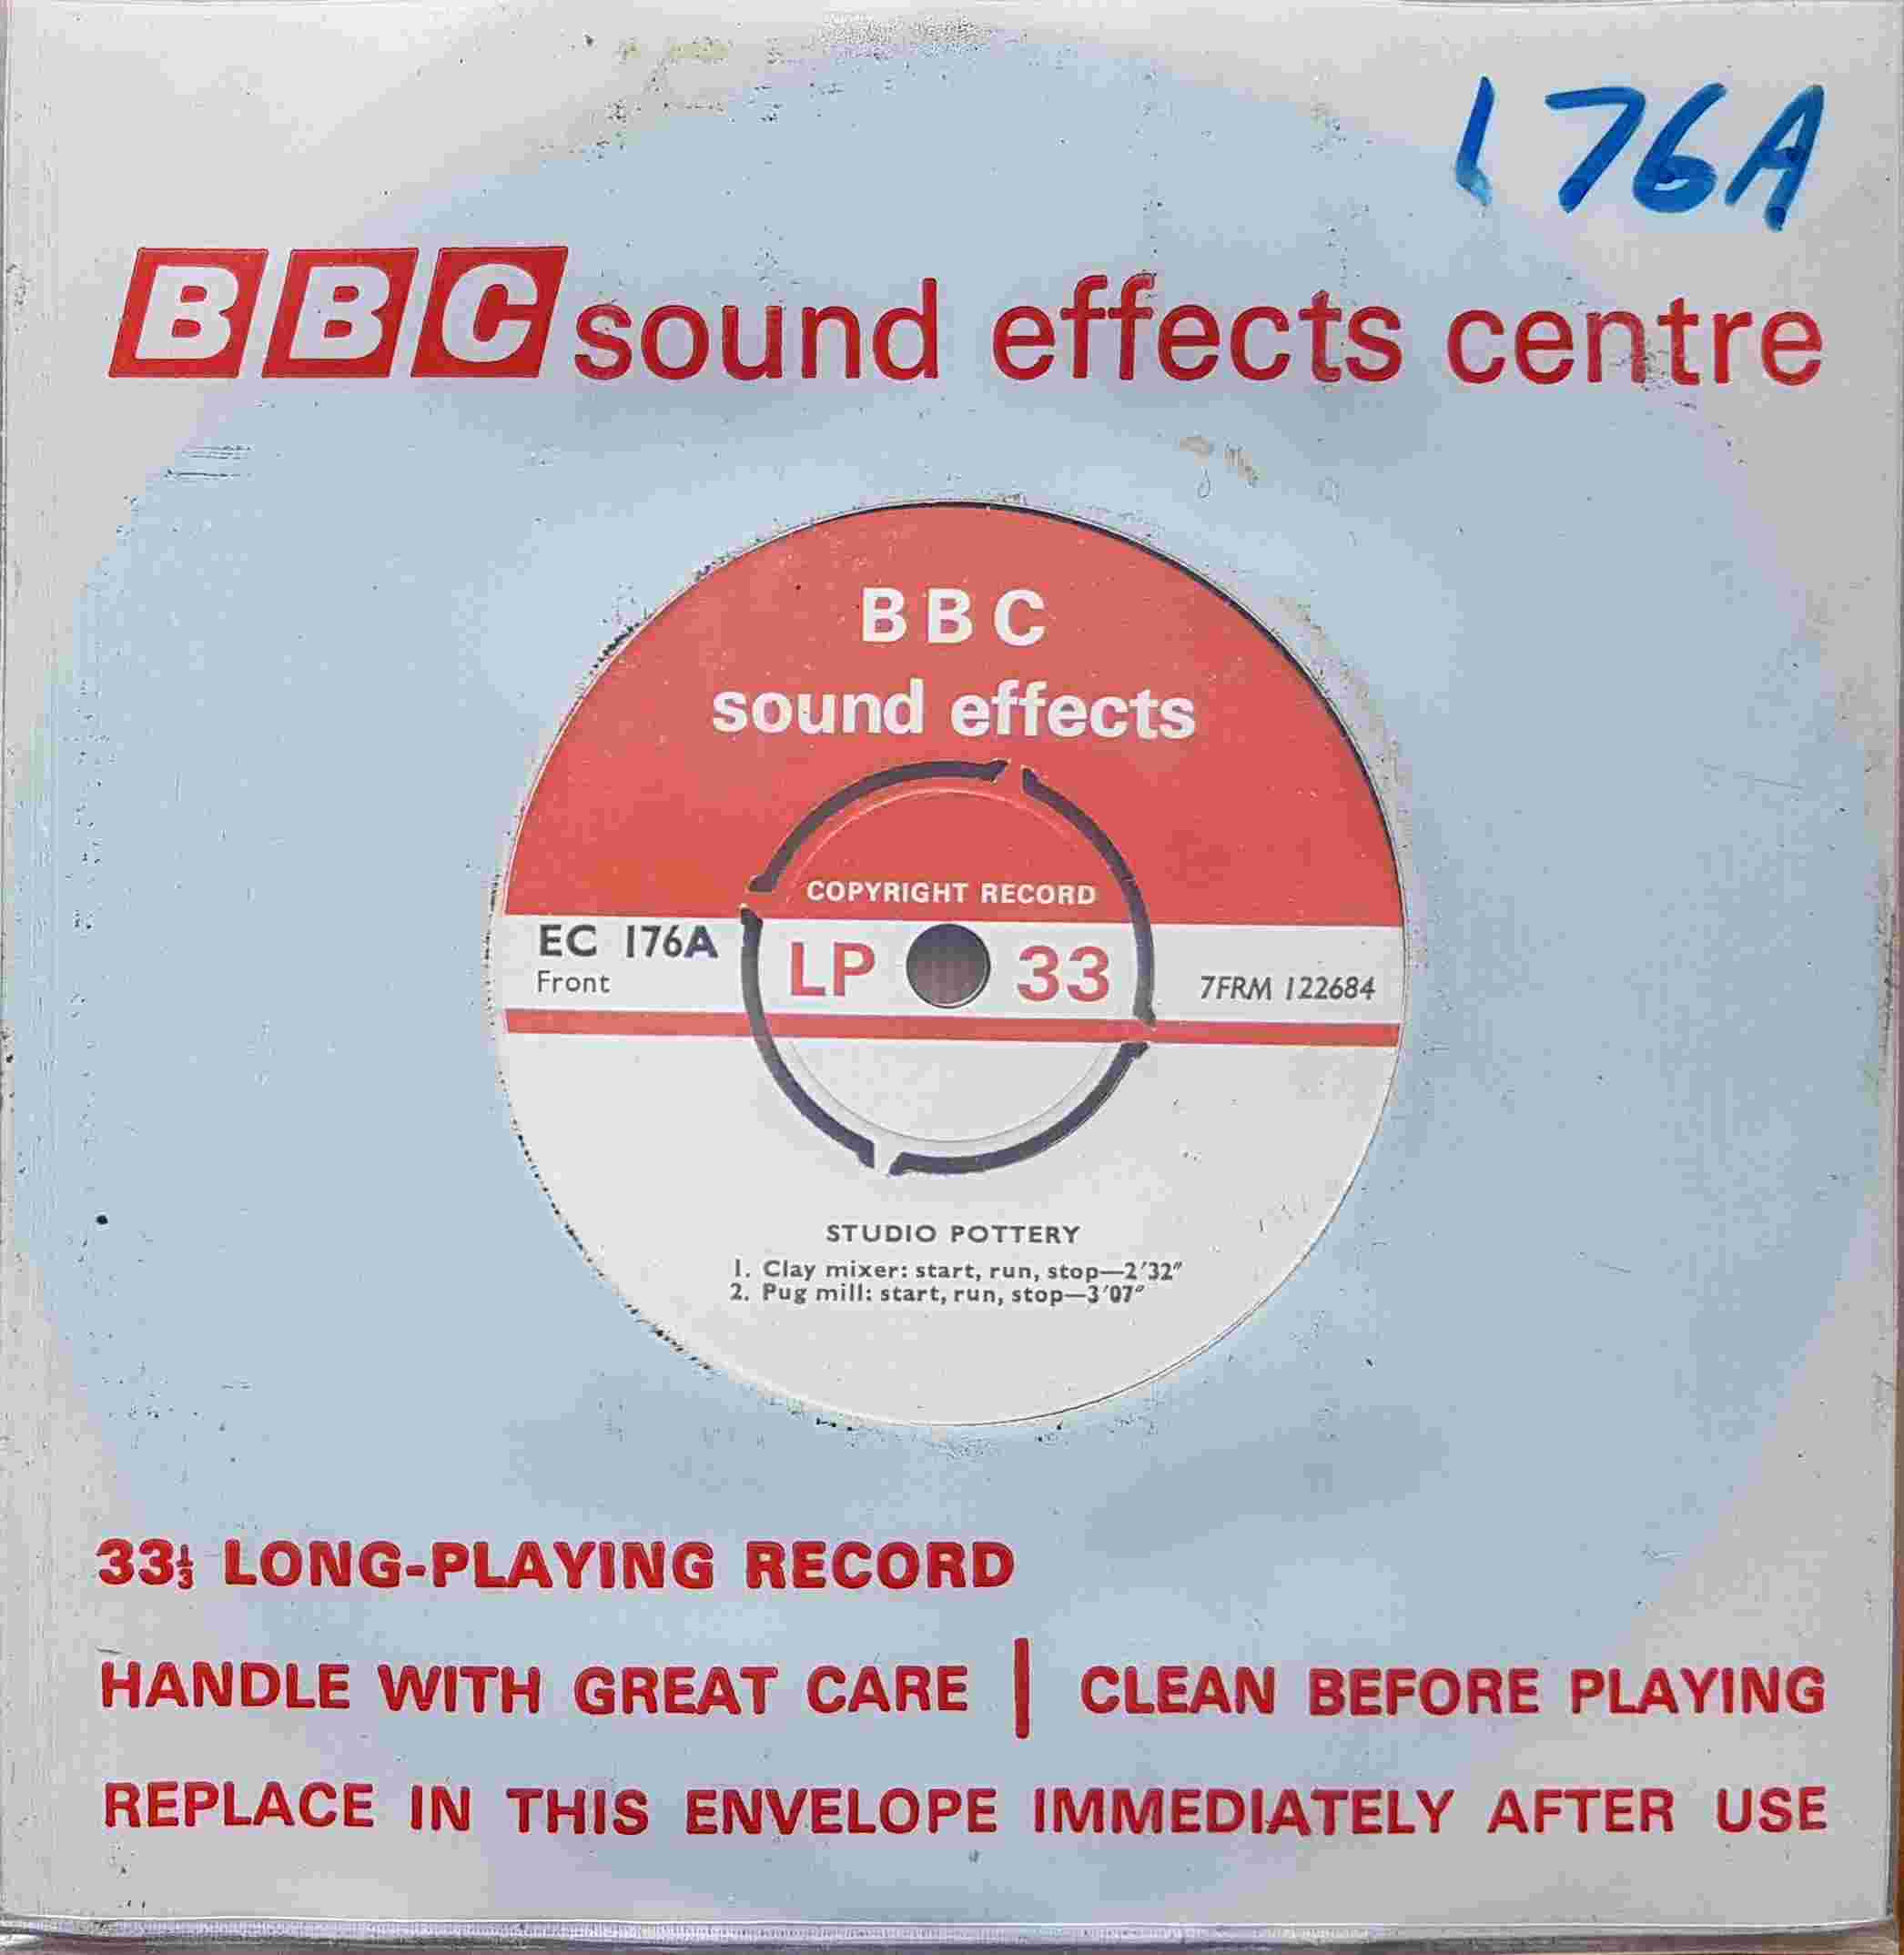 Picture of EC 176A Studio pottery by artist Not registered from the BBC singles - Records and Tapes library